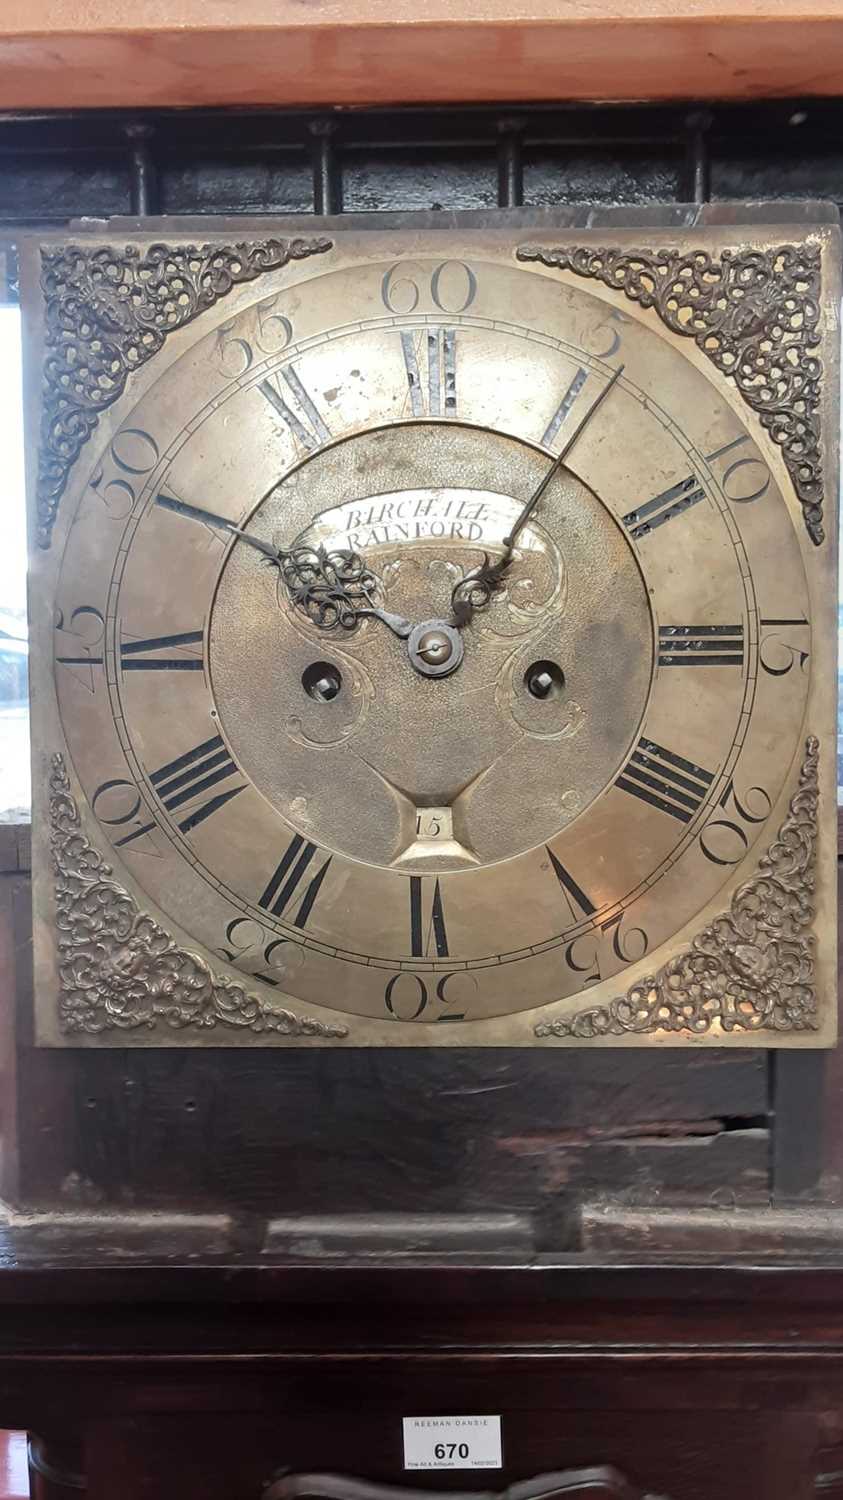 18th century 8-day longcase clock by Birchall, Rainsford with brass square dial and date aperture in - Image 11 of 11